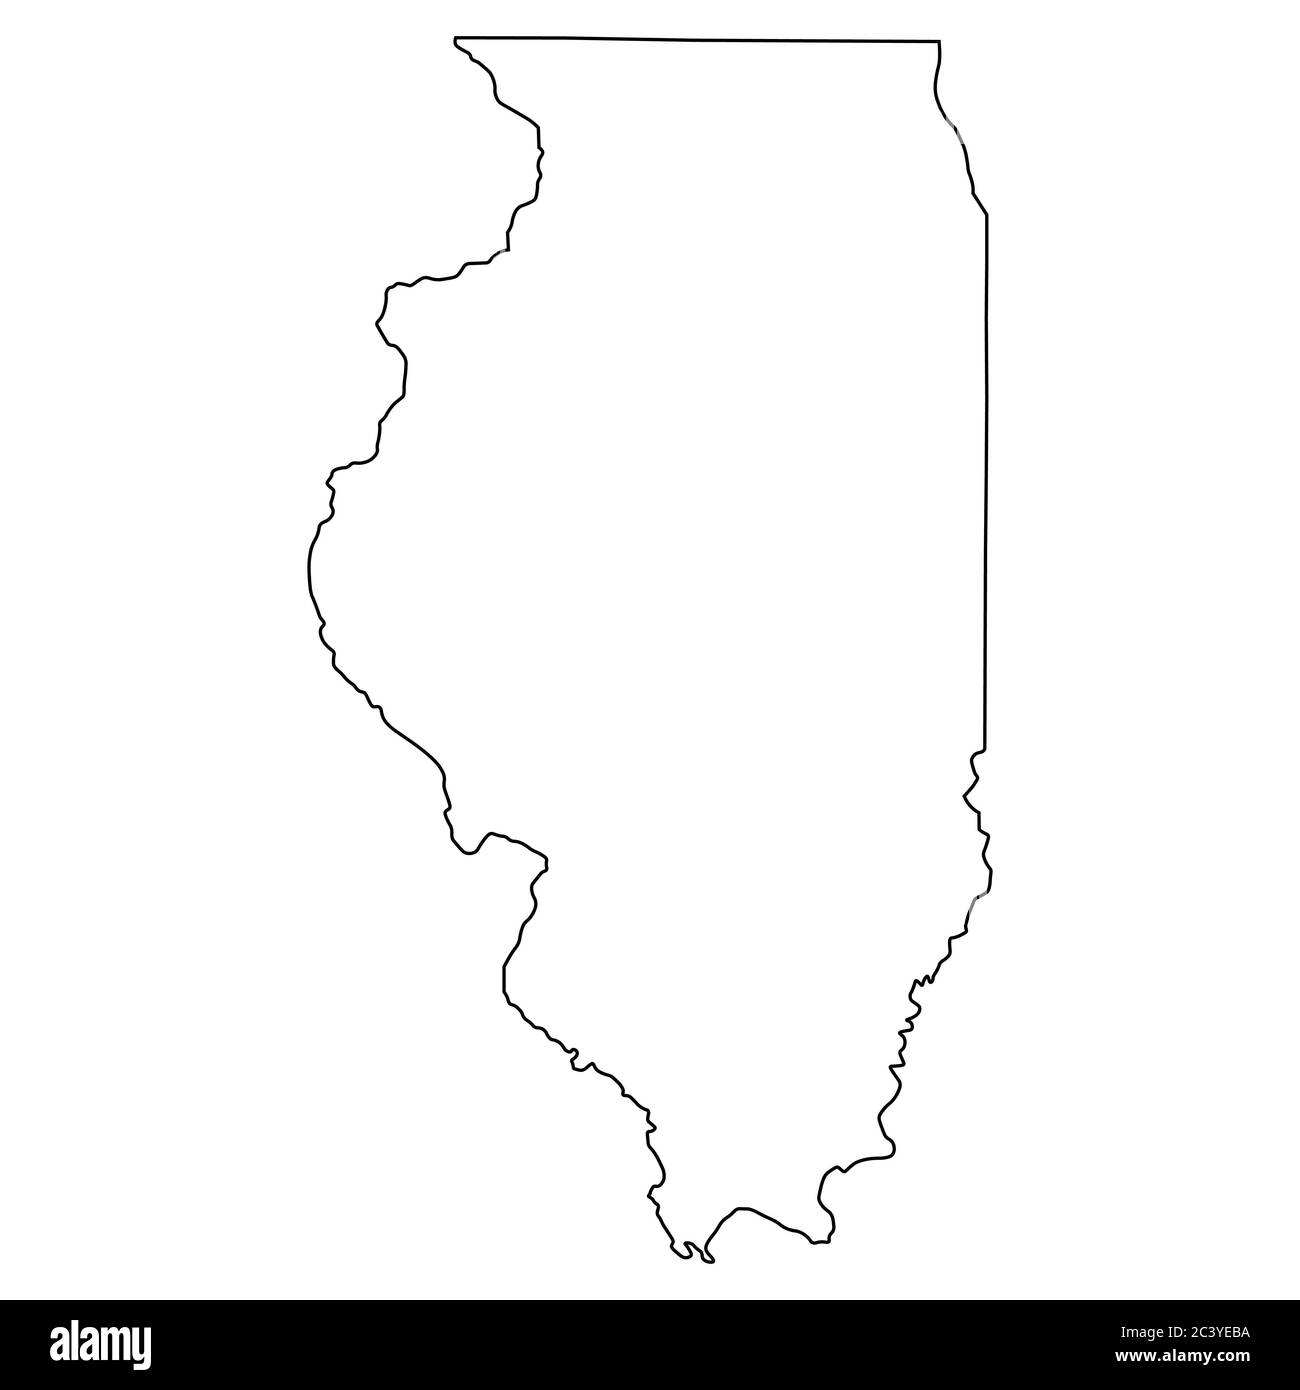 Illinois IL state Maps. Black outline map isolated on a white ...